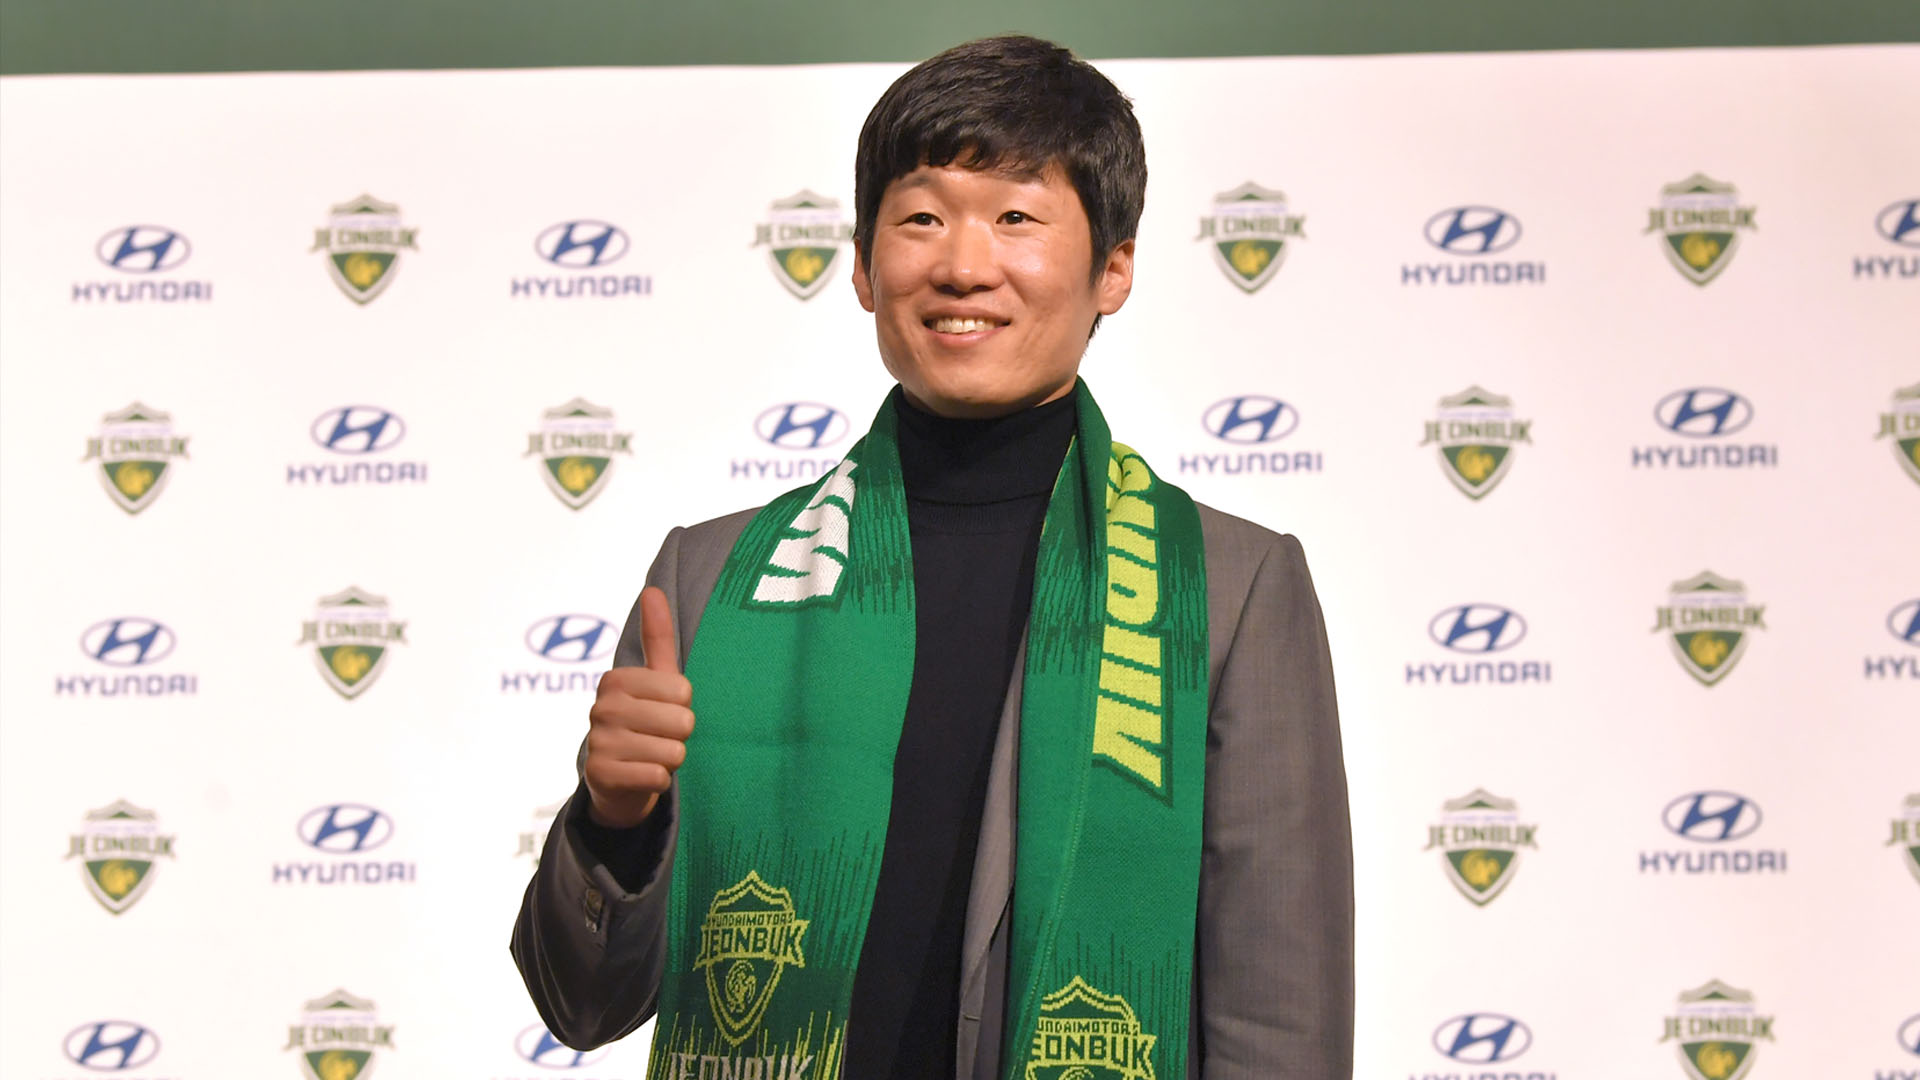 Park Ji-sung “European football youth system will be planted in Jeonbuk”